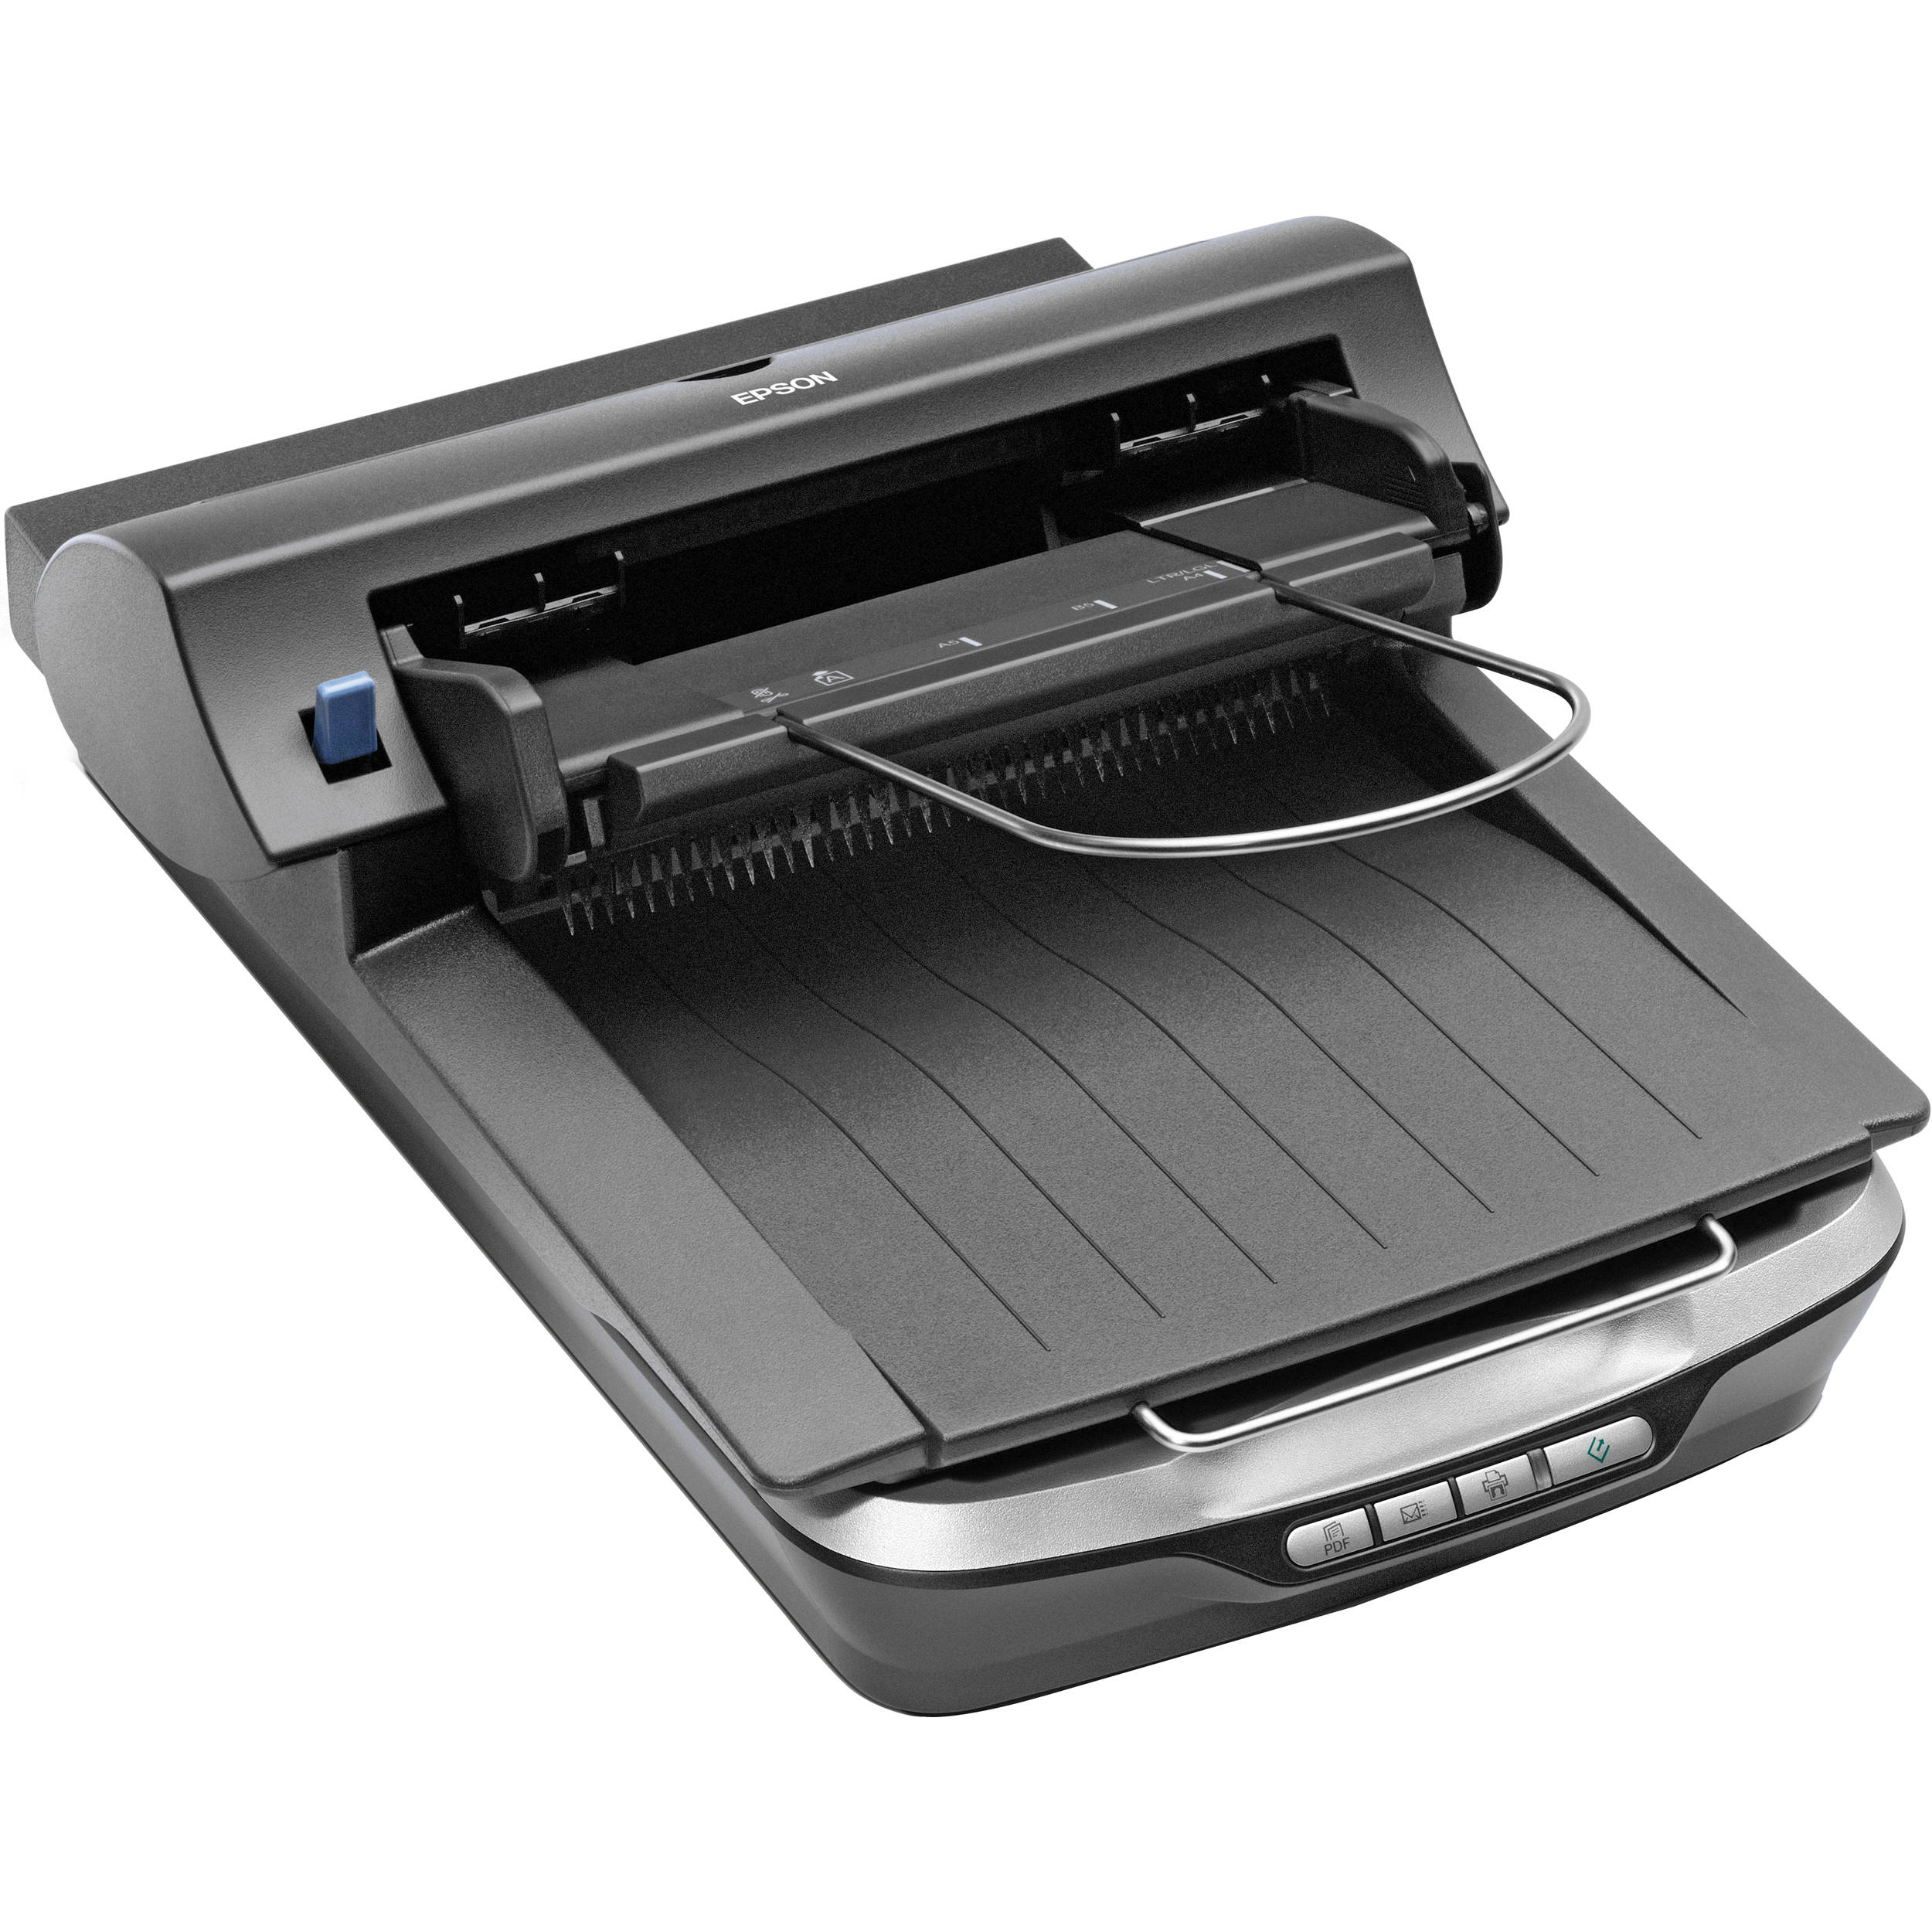 epson v500 photo scanner drivers for mac